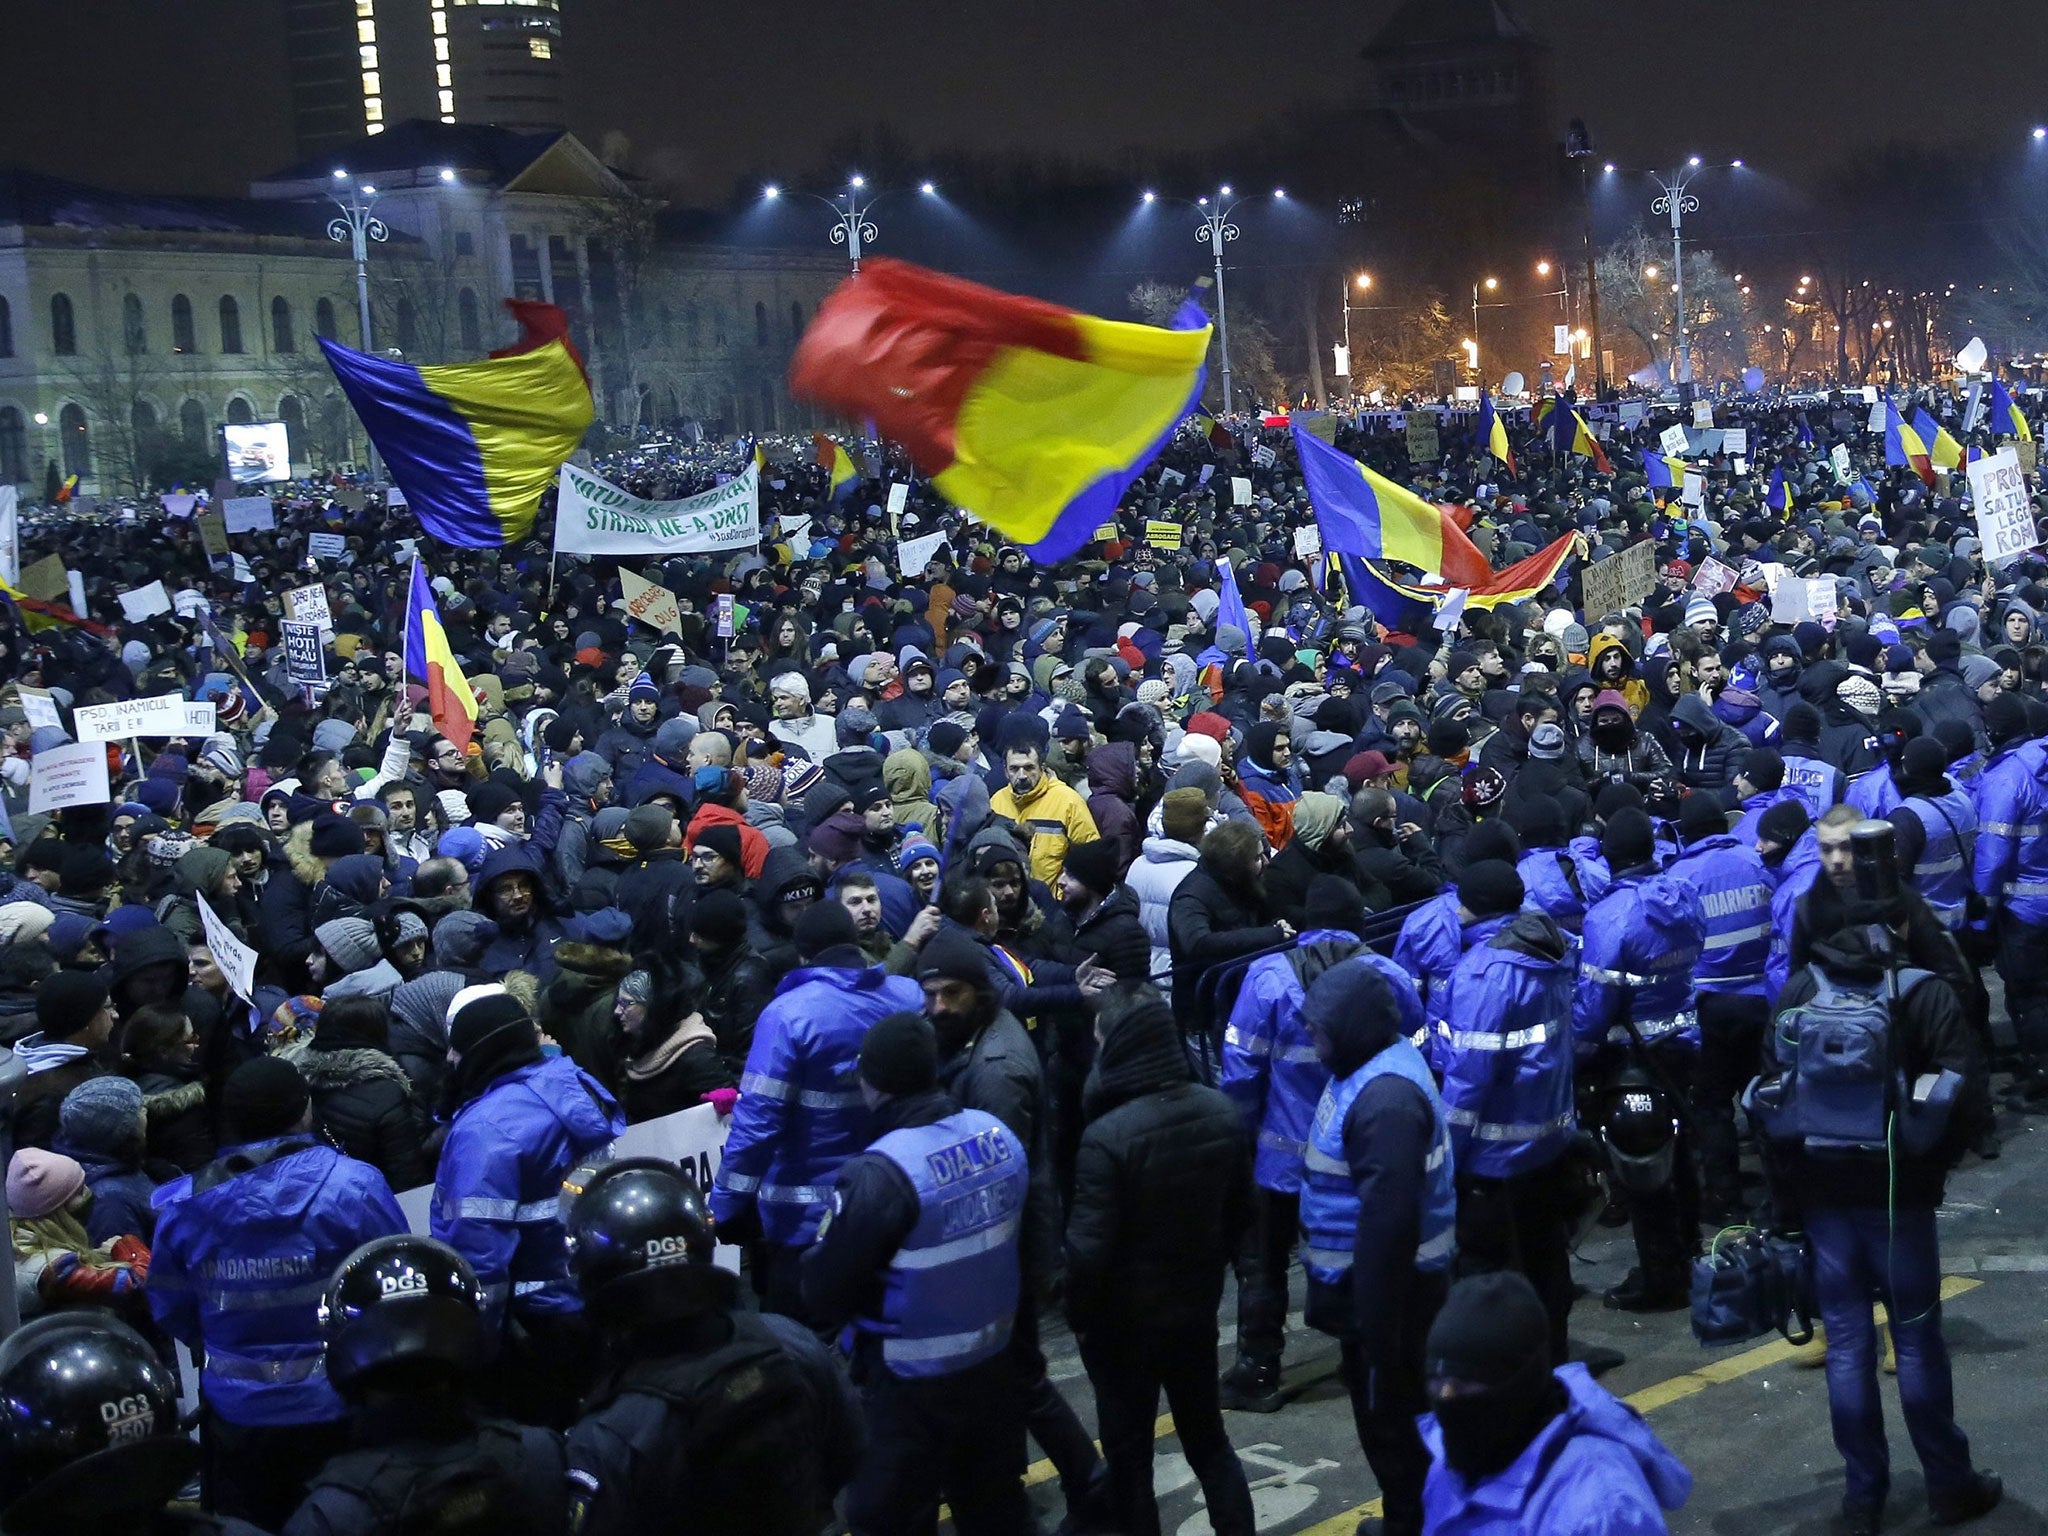 &#13;
Protesters rally in front of the government headquarters in Bucharest, Romania, 1 February, 2017 &#13;